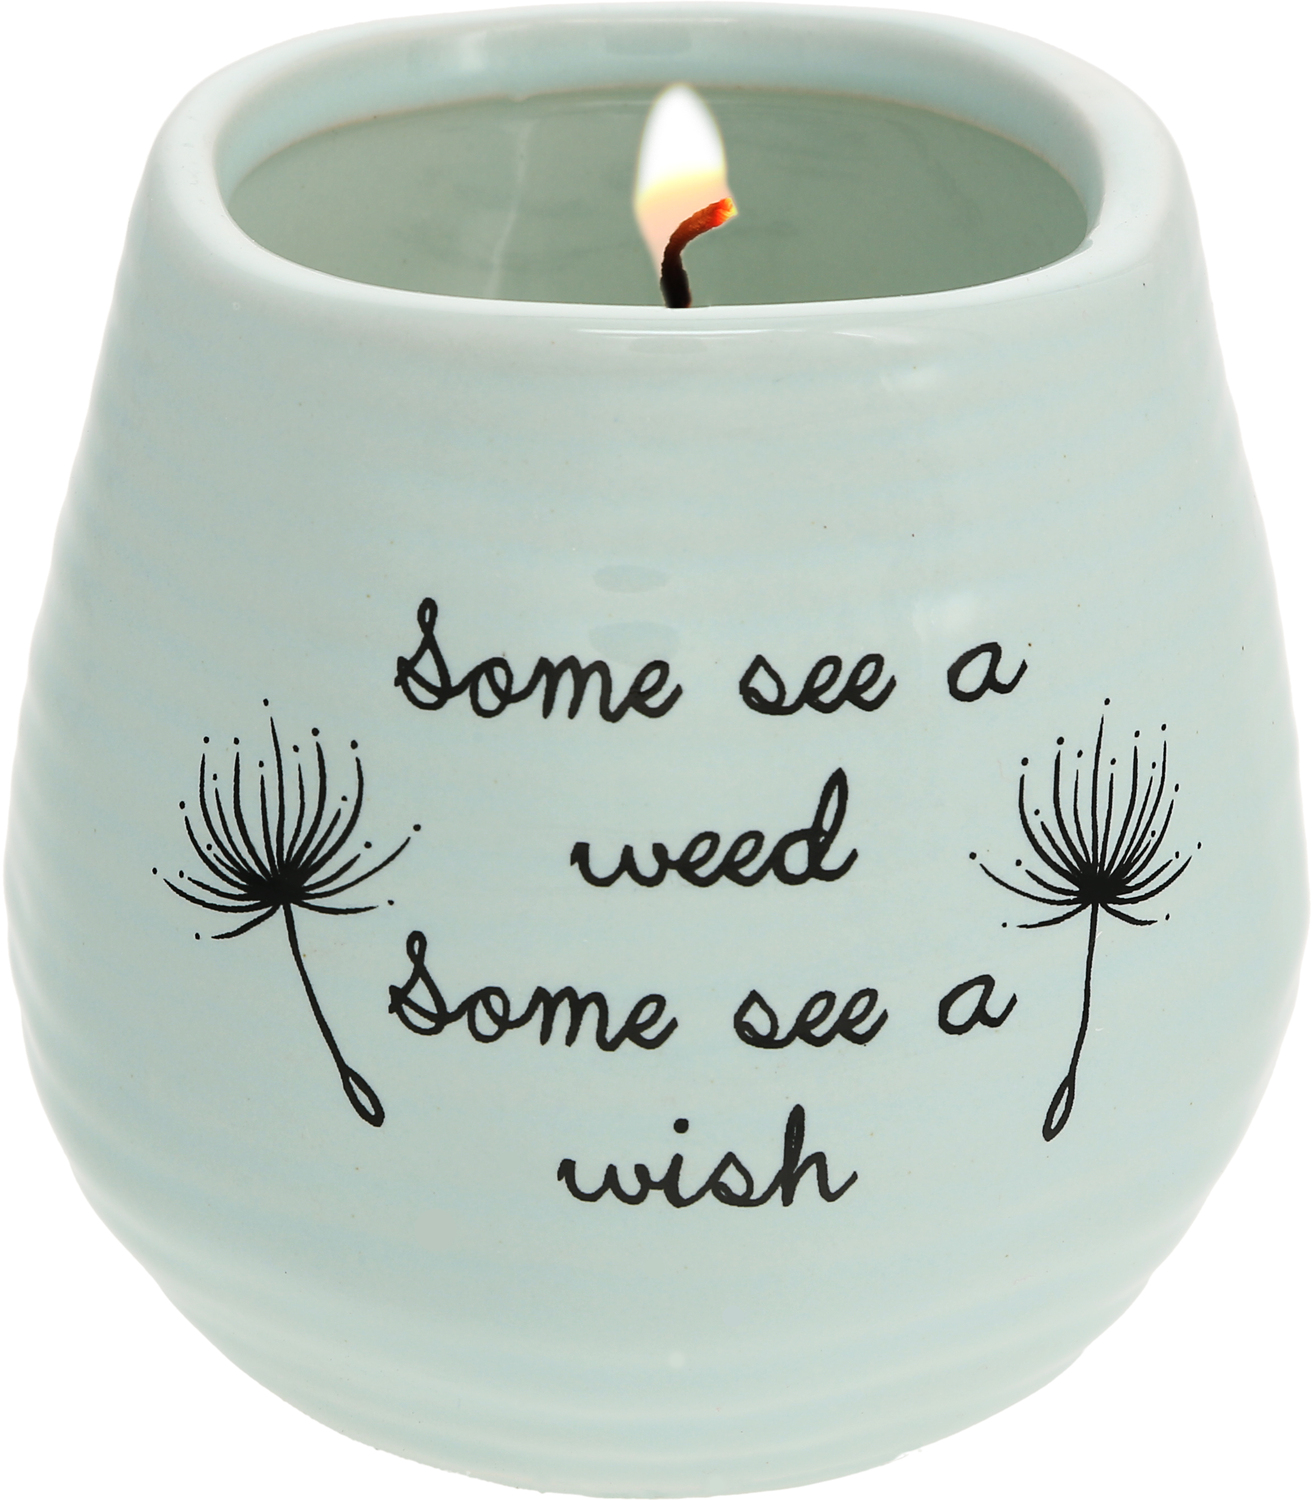 Some See a Wish by Dandelion Wishes - Some See a Wish - 8 oz - 100% Soy Wax Candle
Scent: Serenity